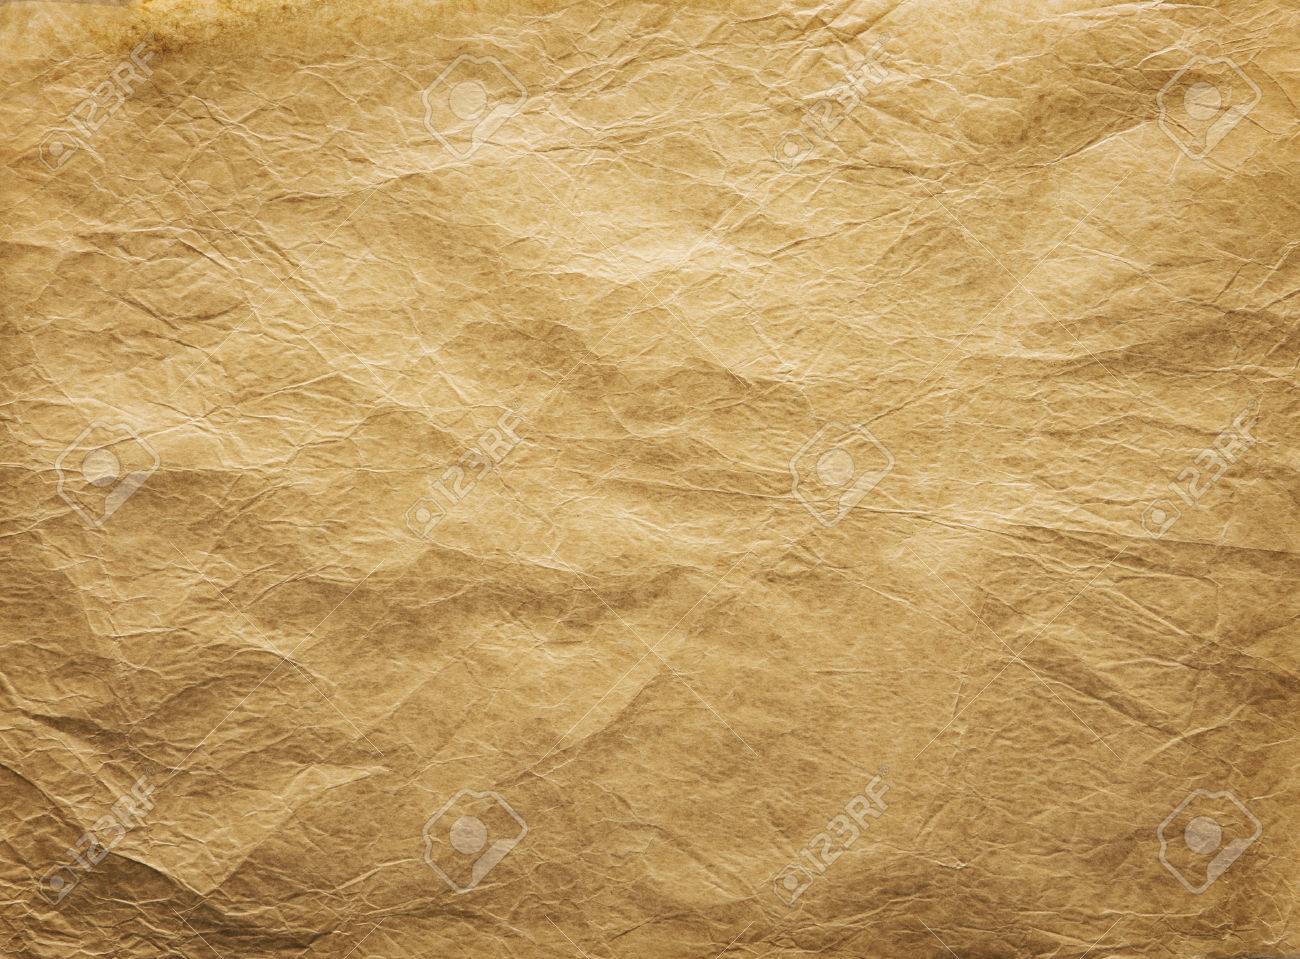 Old Wrinkled Paper Background Papers Folds Wrinkles Texture